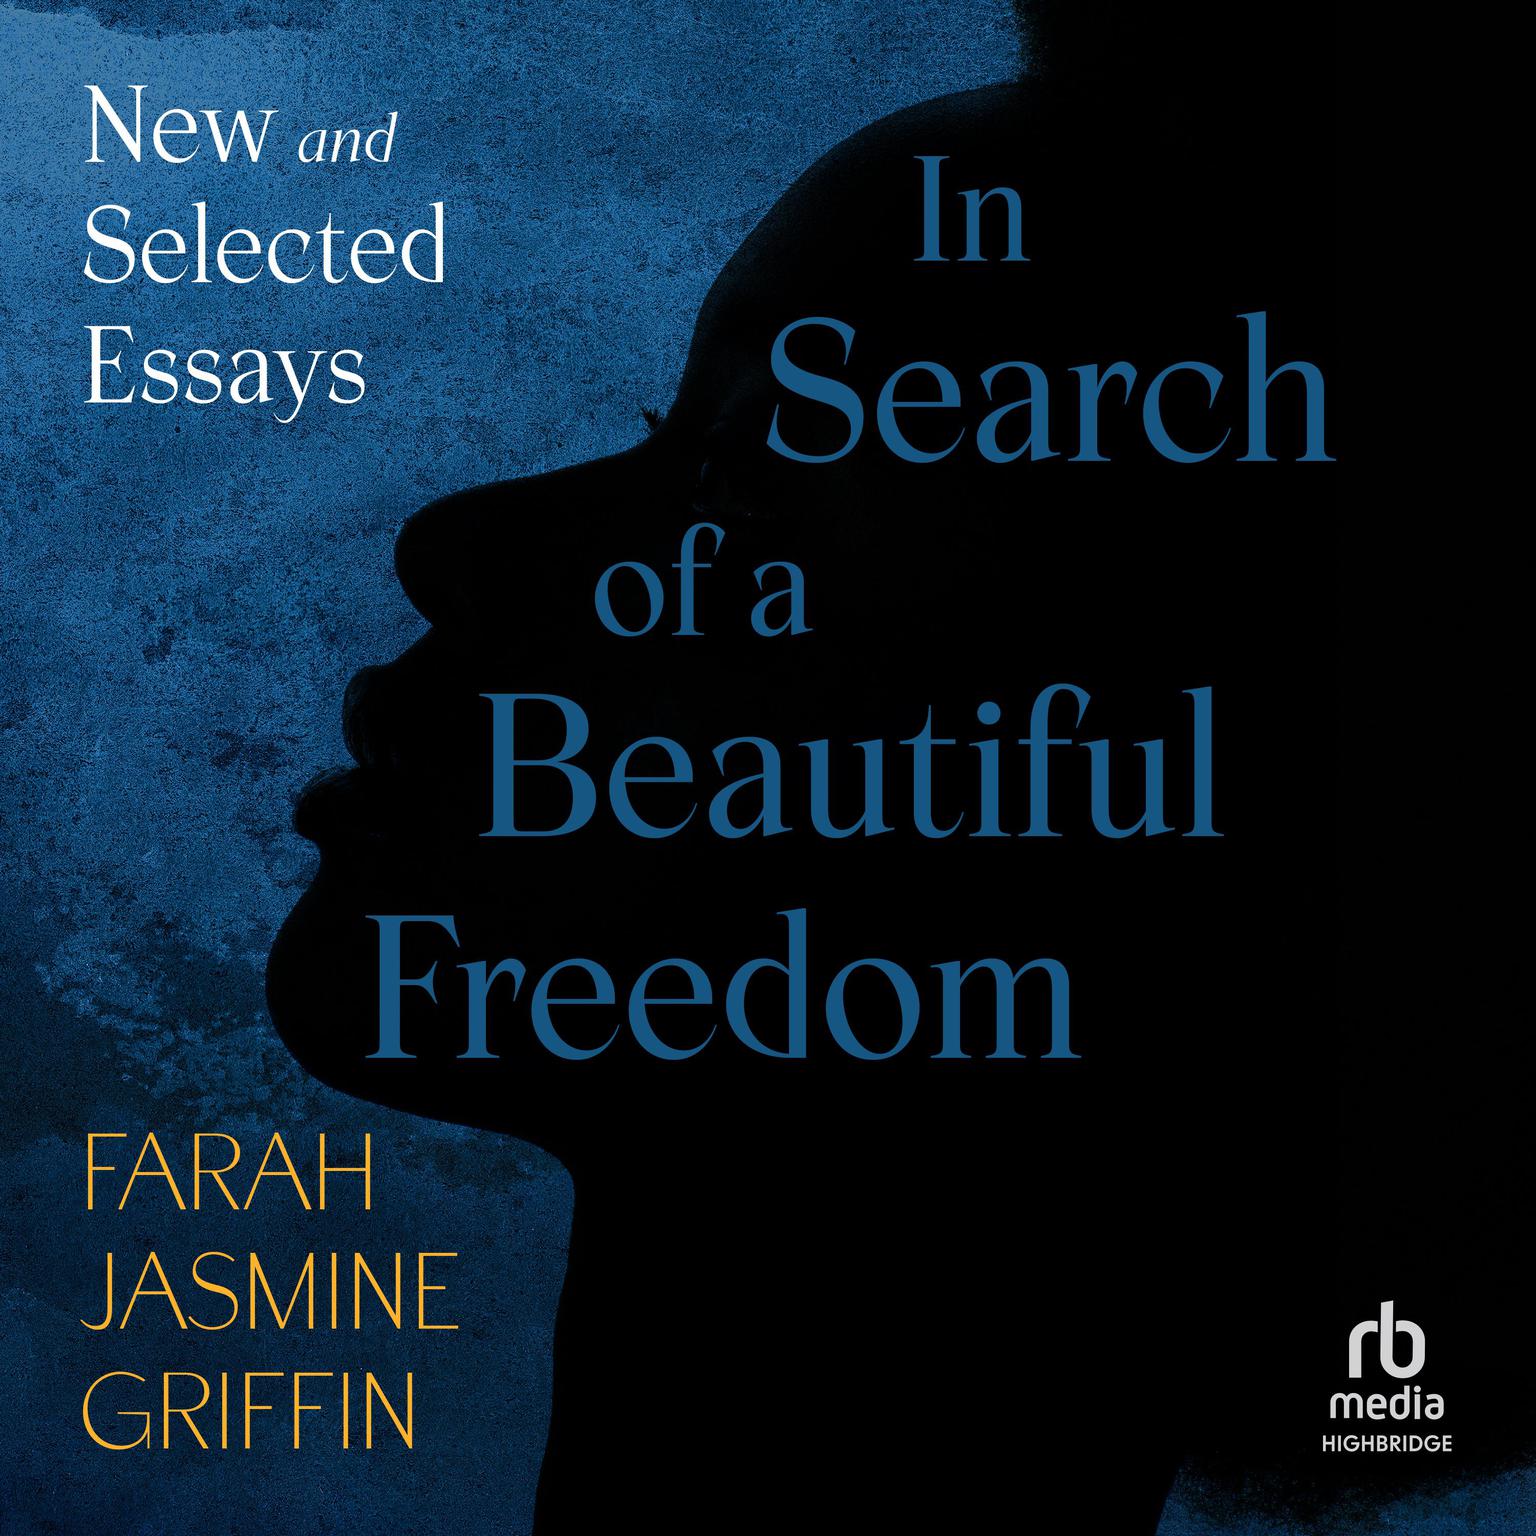 In Search of a Beautiful Freedom: New and Selected Essays Audiobook, by Farah Jasmine Griffin